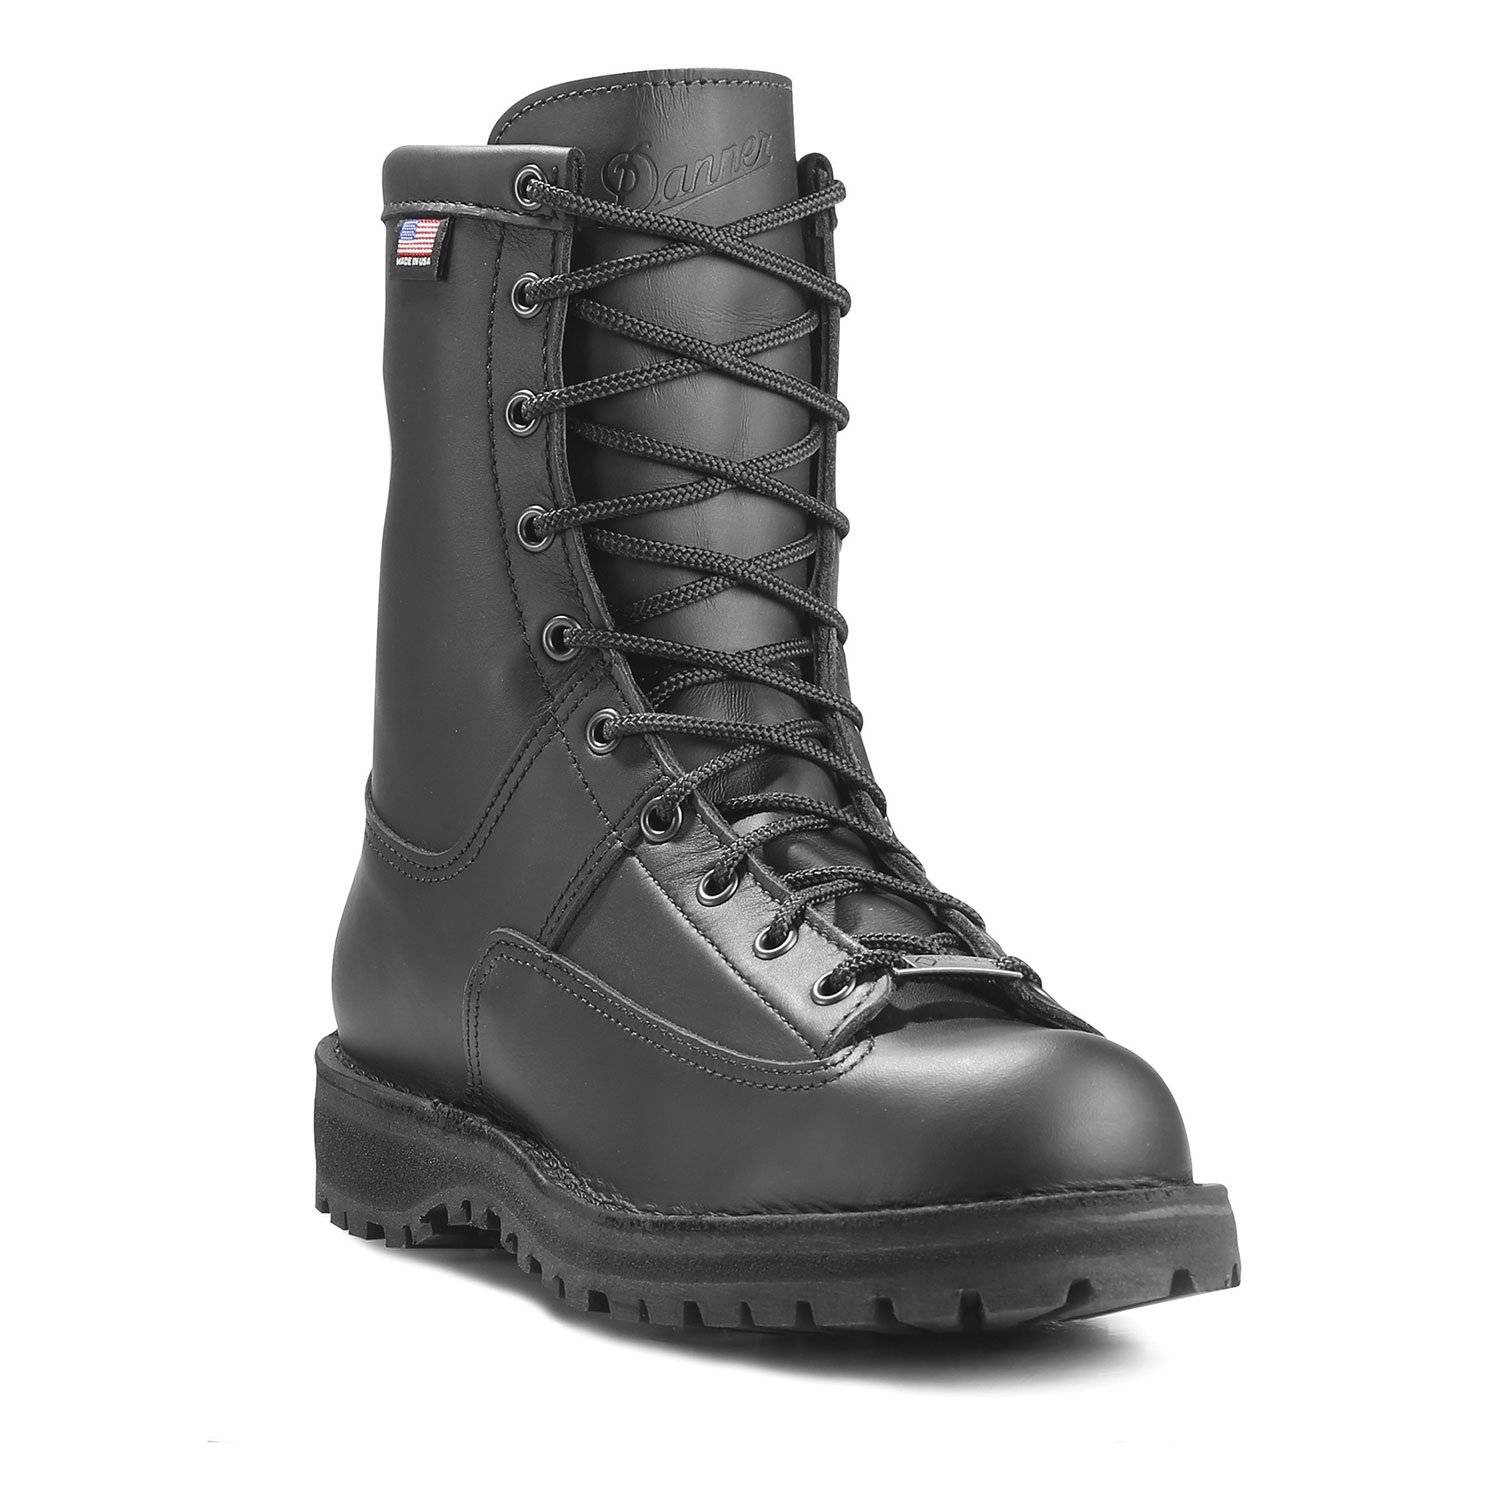 Danner 8" Recon Insulated Boot